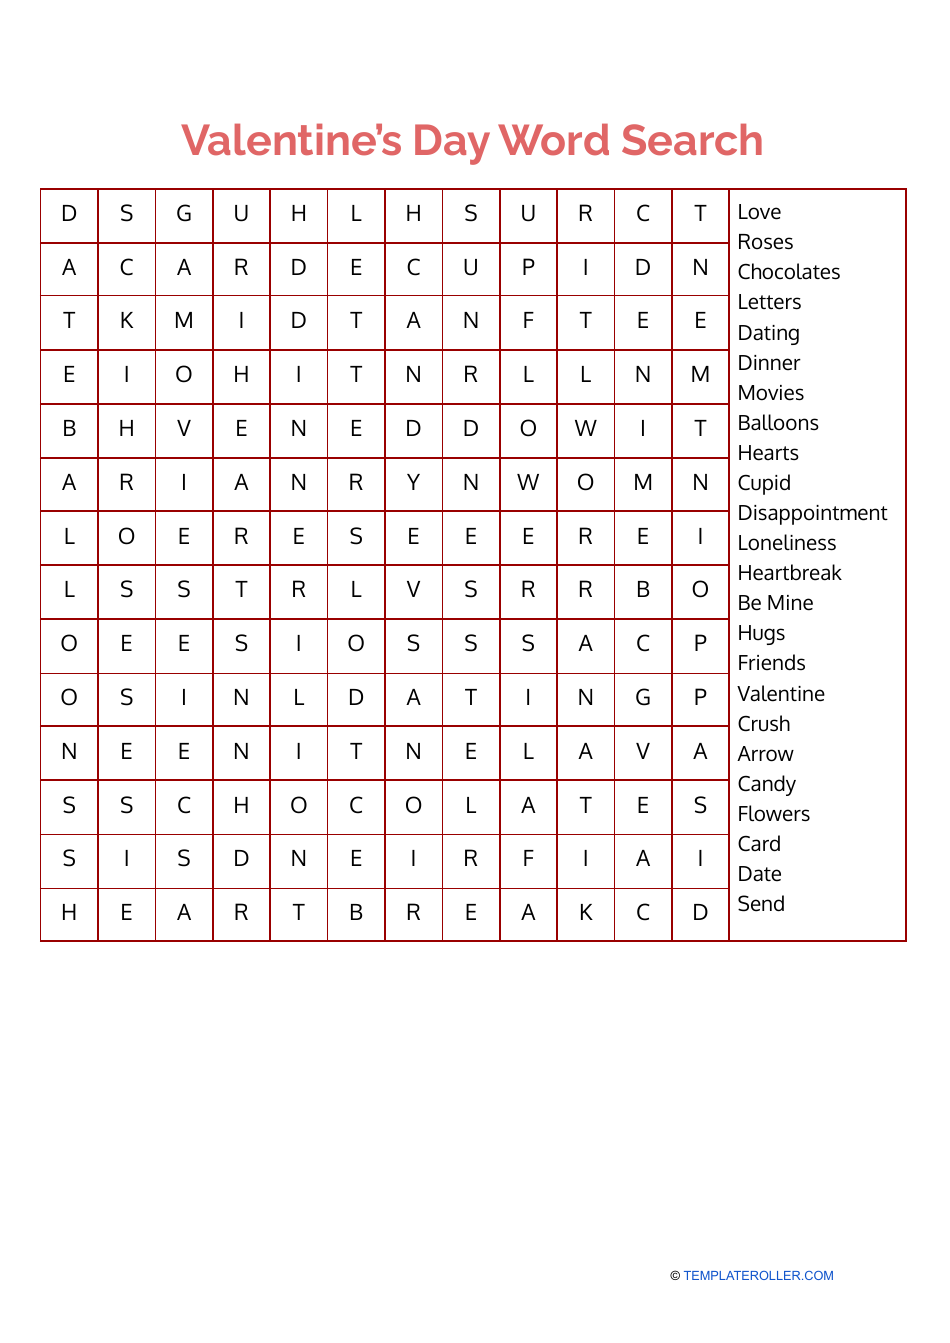 Valentine's Day Word Search on red background